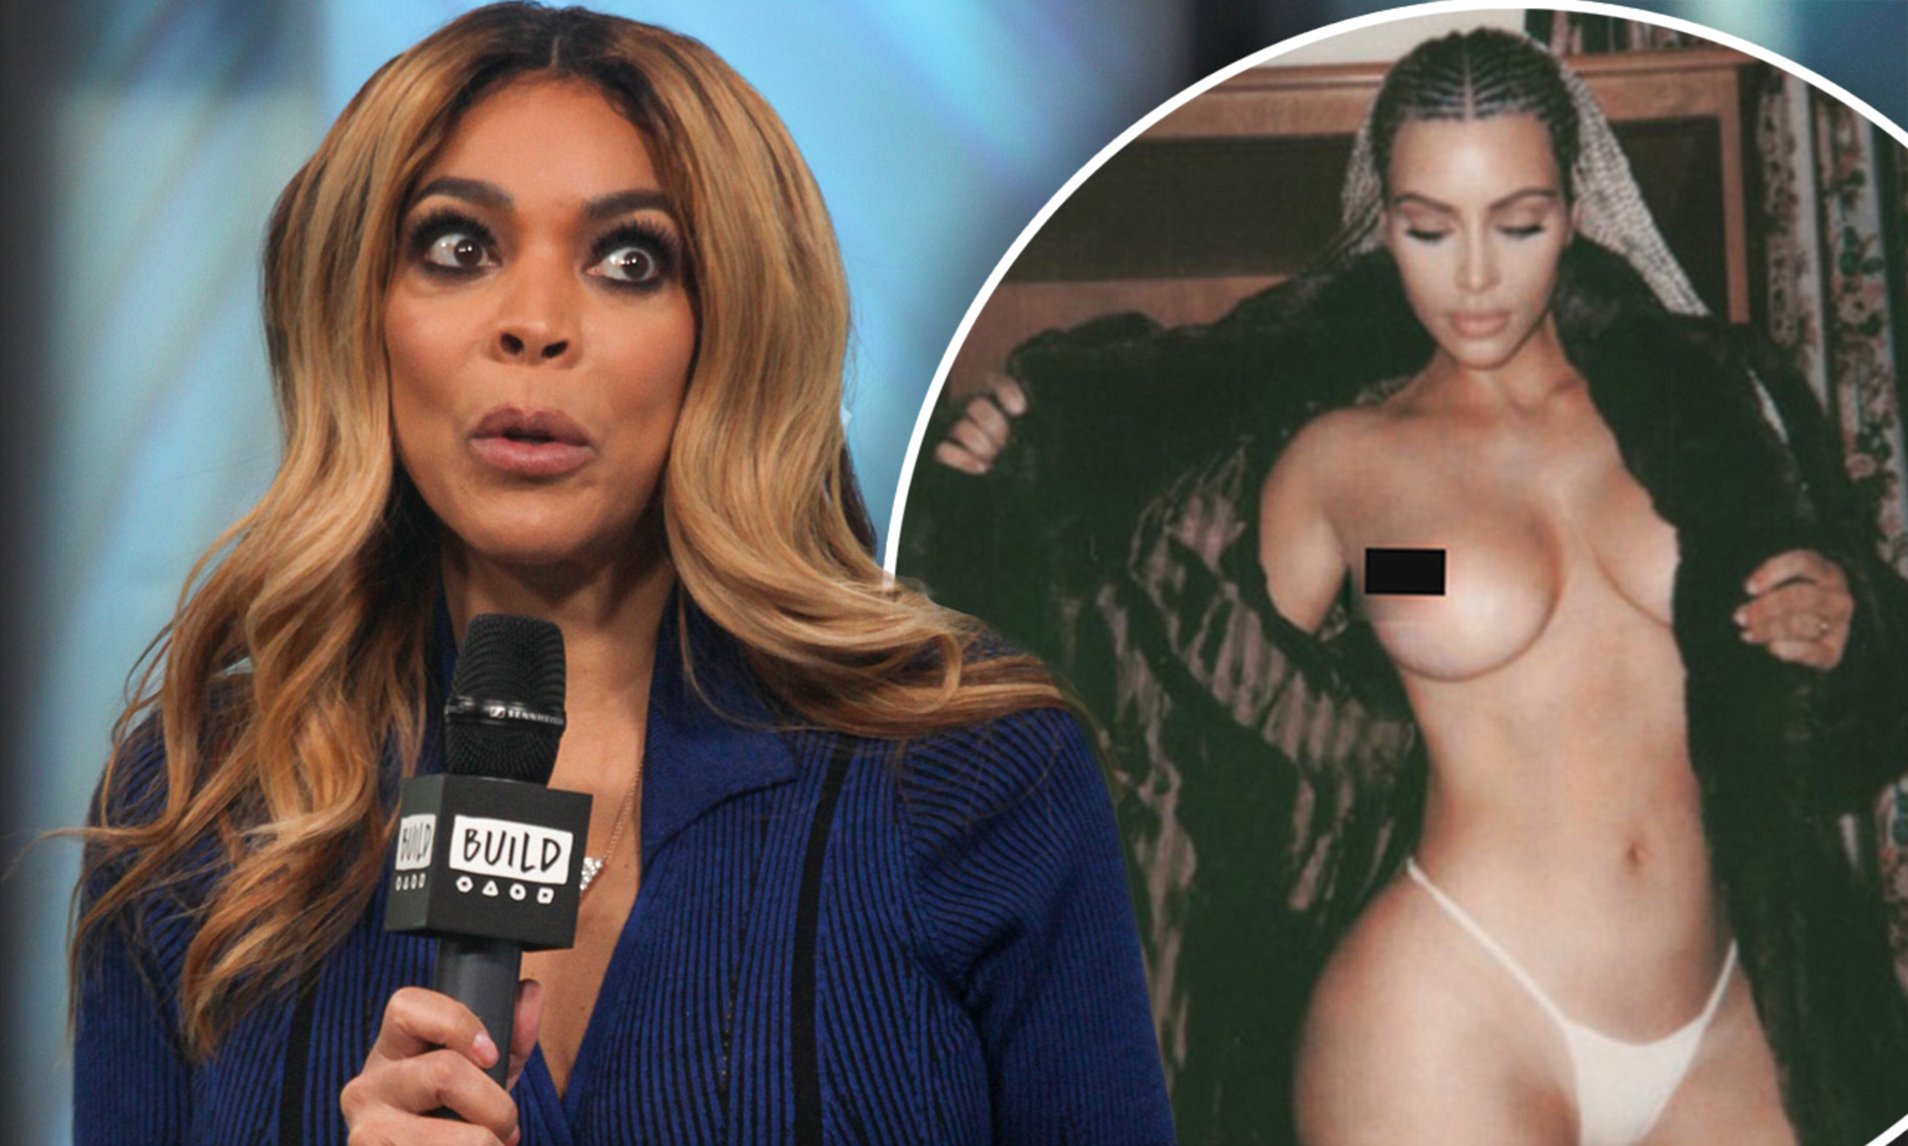 darren truswell share wendy williams nsfw photos